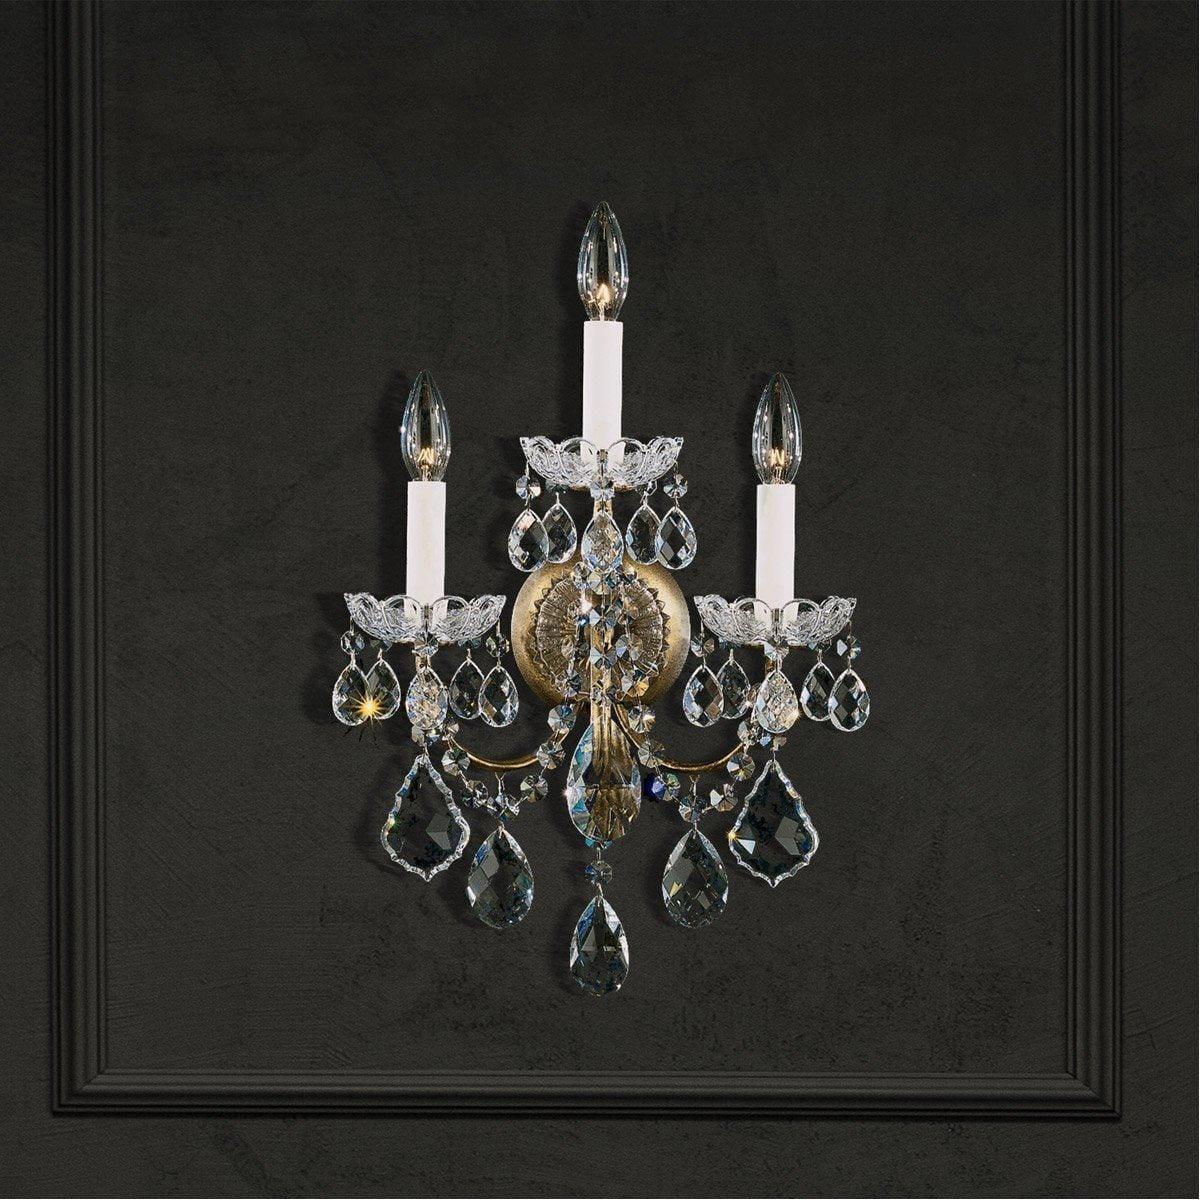 Schonbek 1870 - New Orleans Wall Sconce - 3652-23H | Montreal Lighting & Hardware